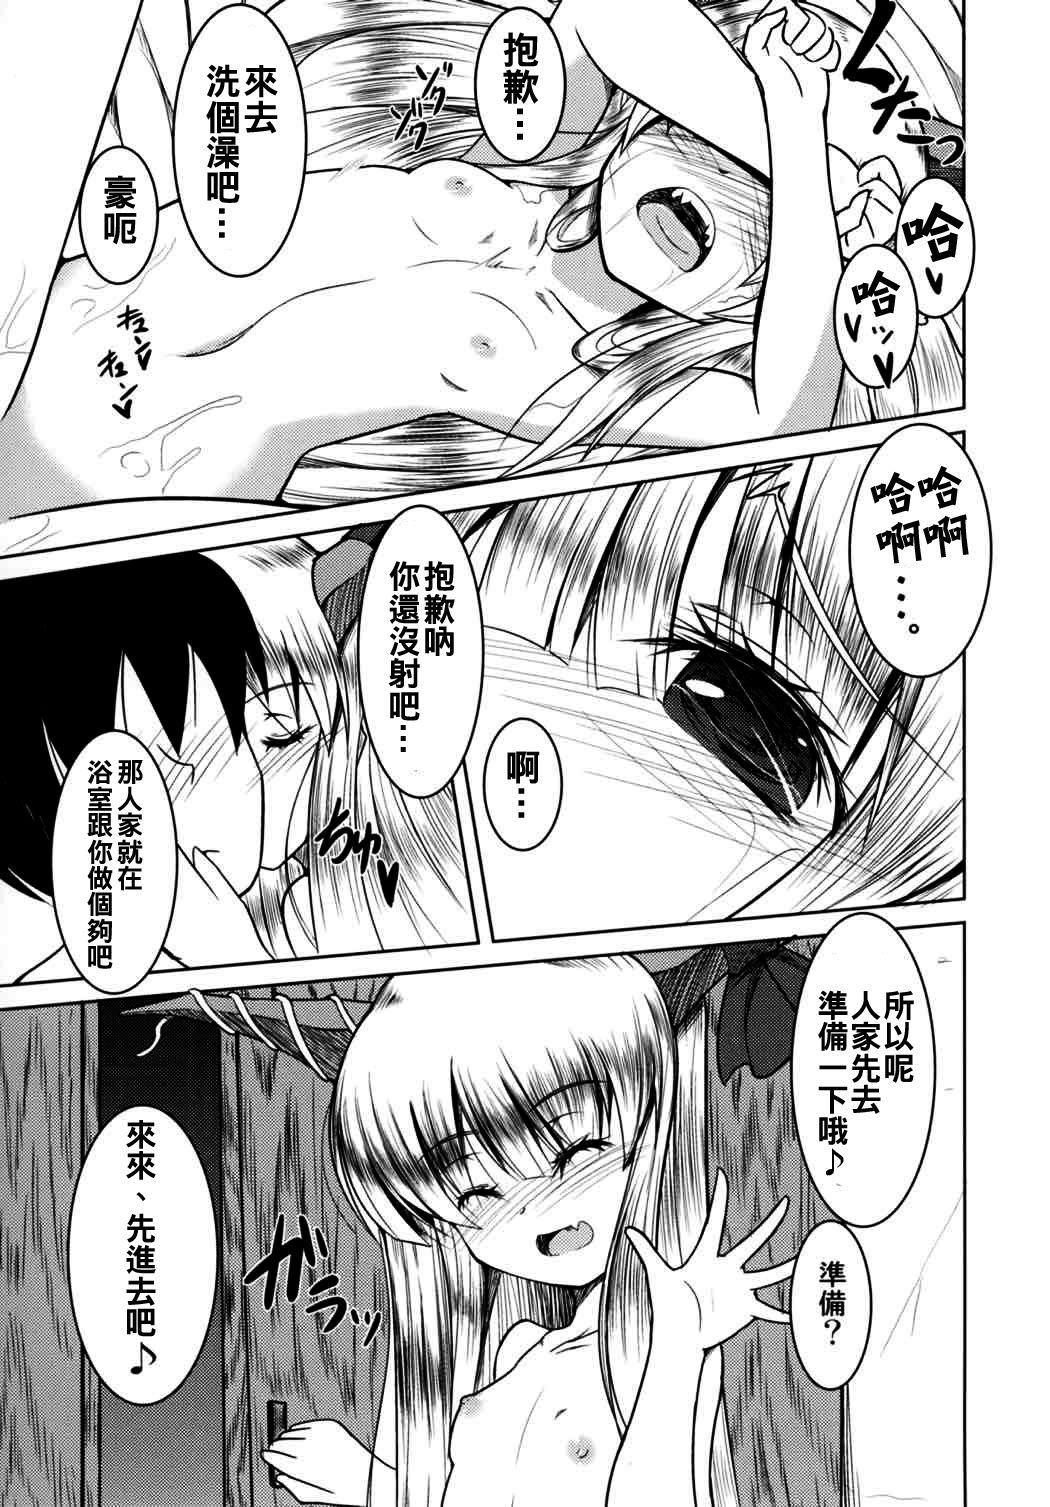 Twinks Oniyome Love Love HaramaSex - Touhou project Small - Page 11